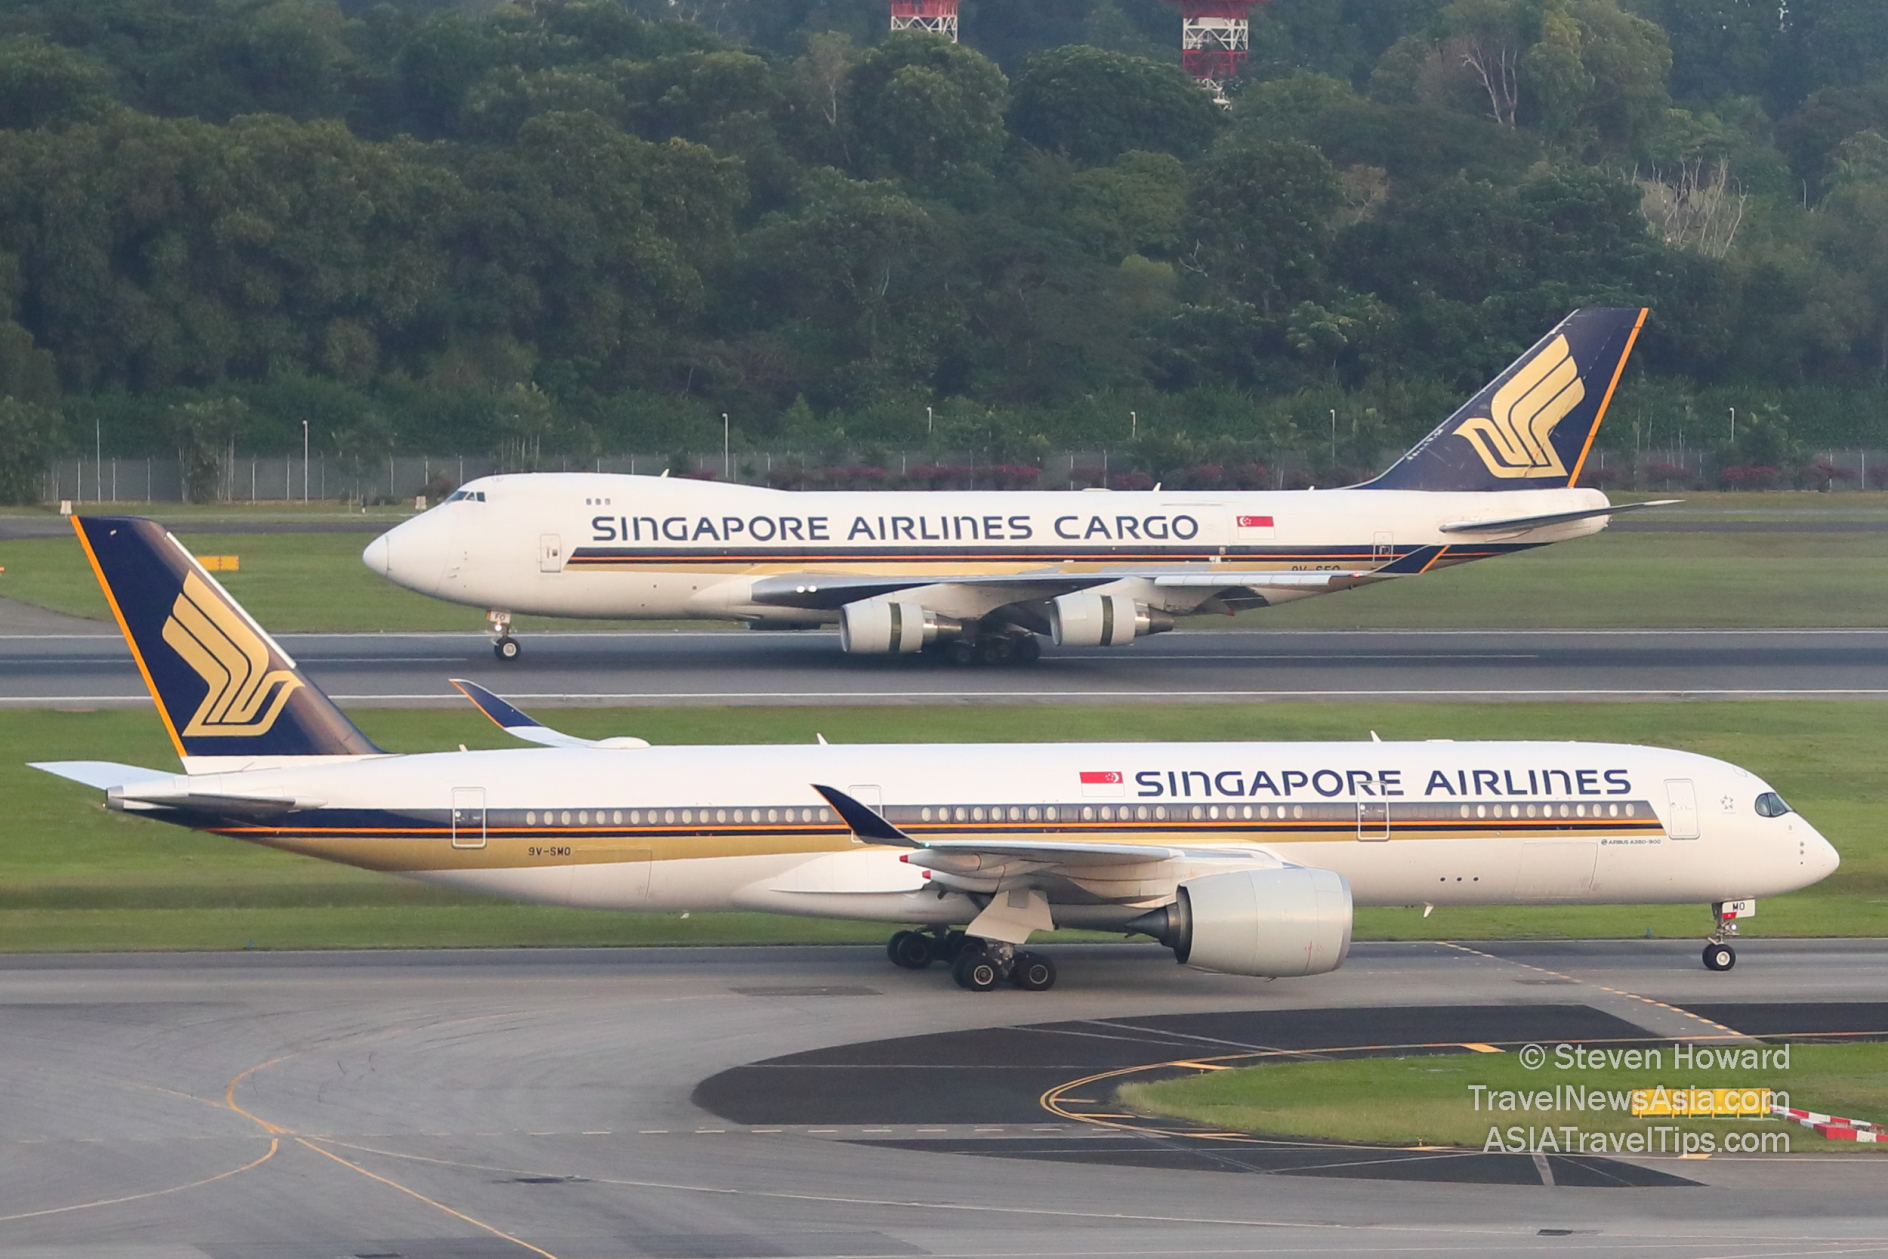 Singapore Airlines will use the Airbus A350F to replace the Boeing 747Fs in its fleet. Picture of a Boeing 747F in the background with an Airbus A350-900 in the foreground. Picture by Steven Howard of TravelNewsAsia.com Click to enlarge.